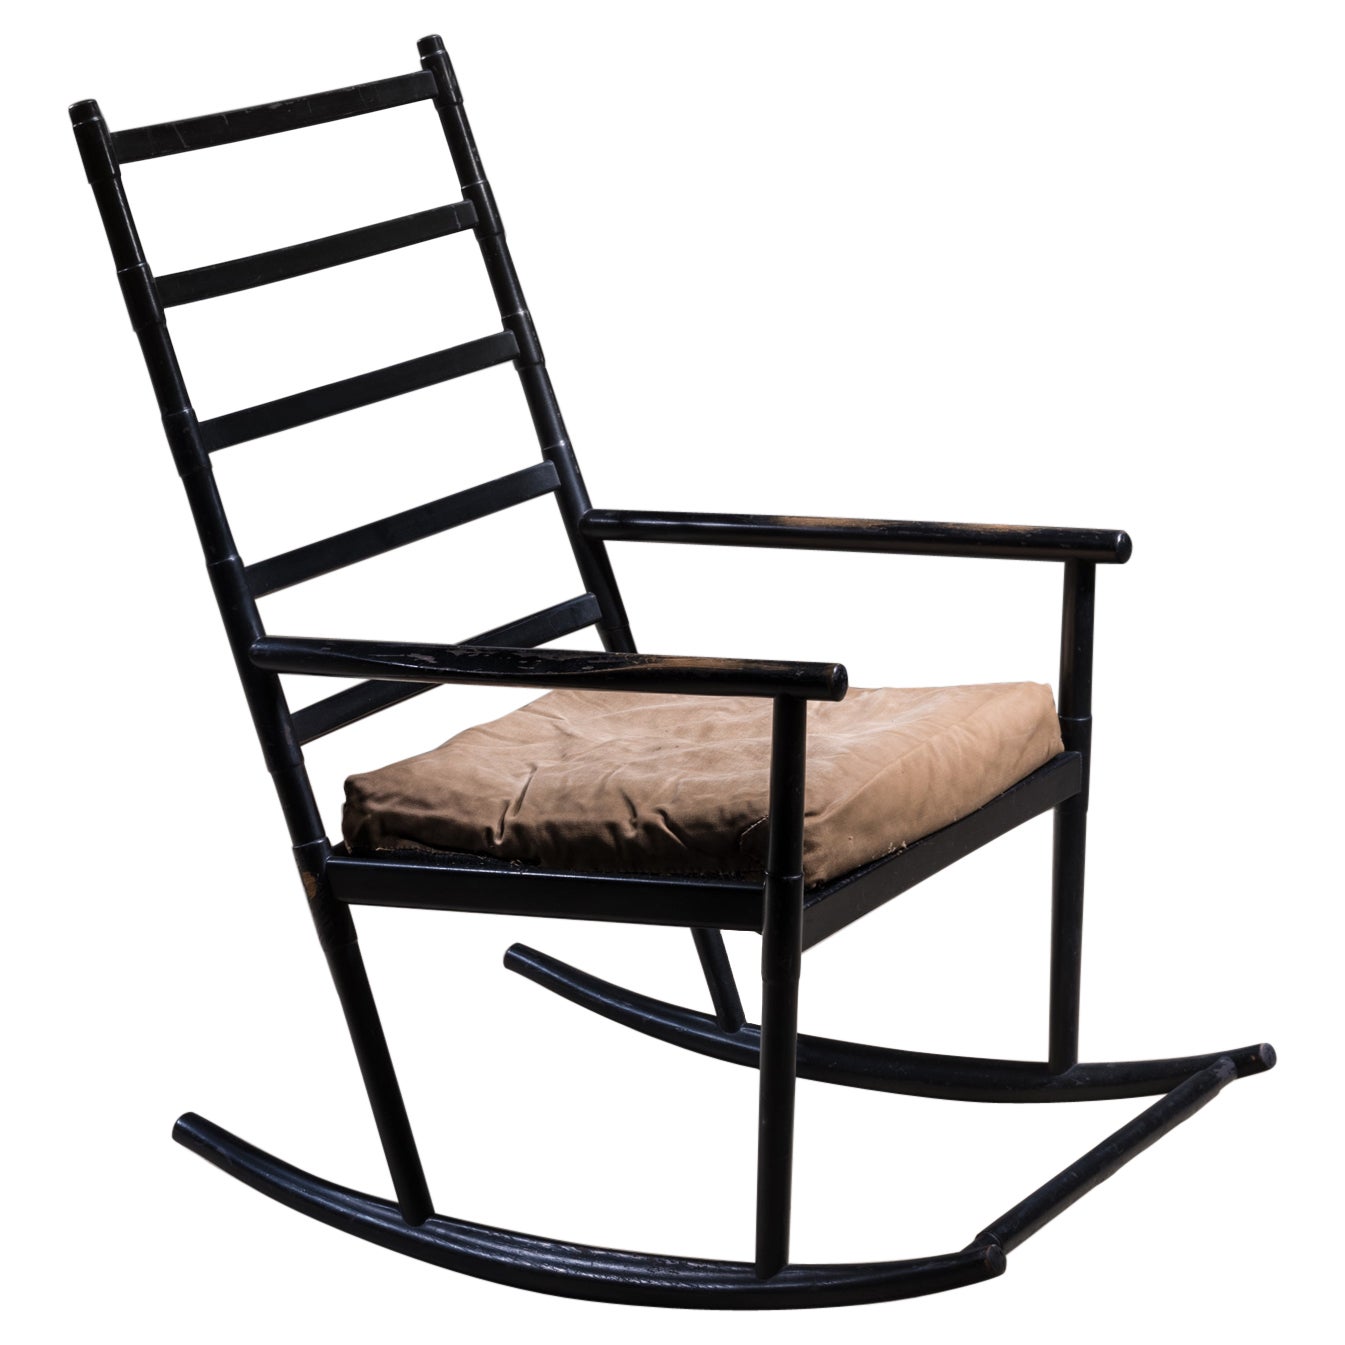 Black Lacquered Wood Rocking Chair, Denmark, 1950s For Sale